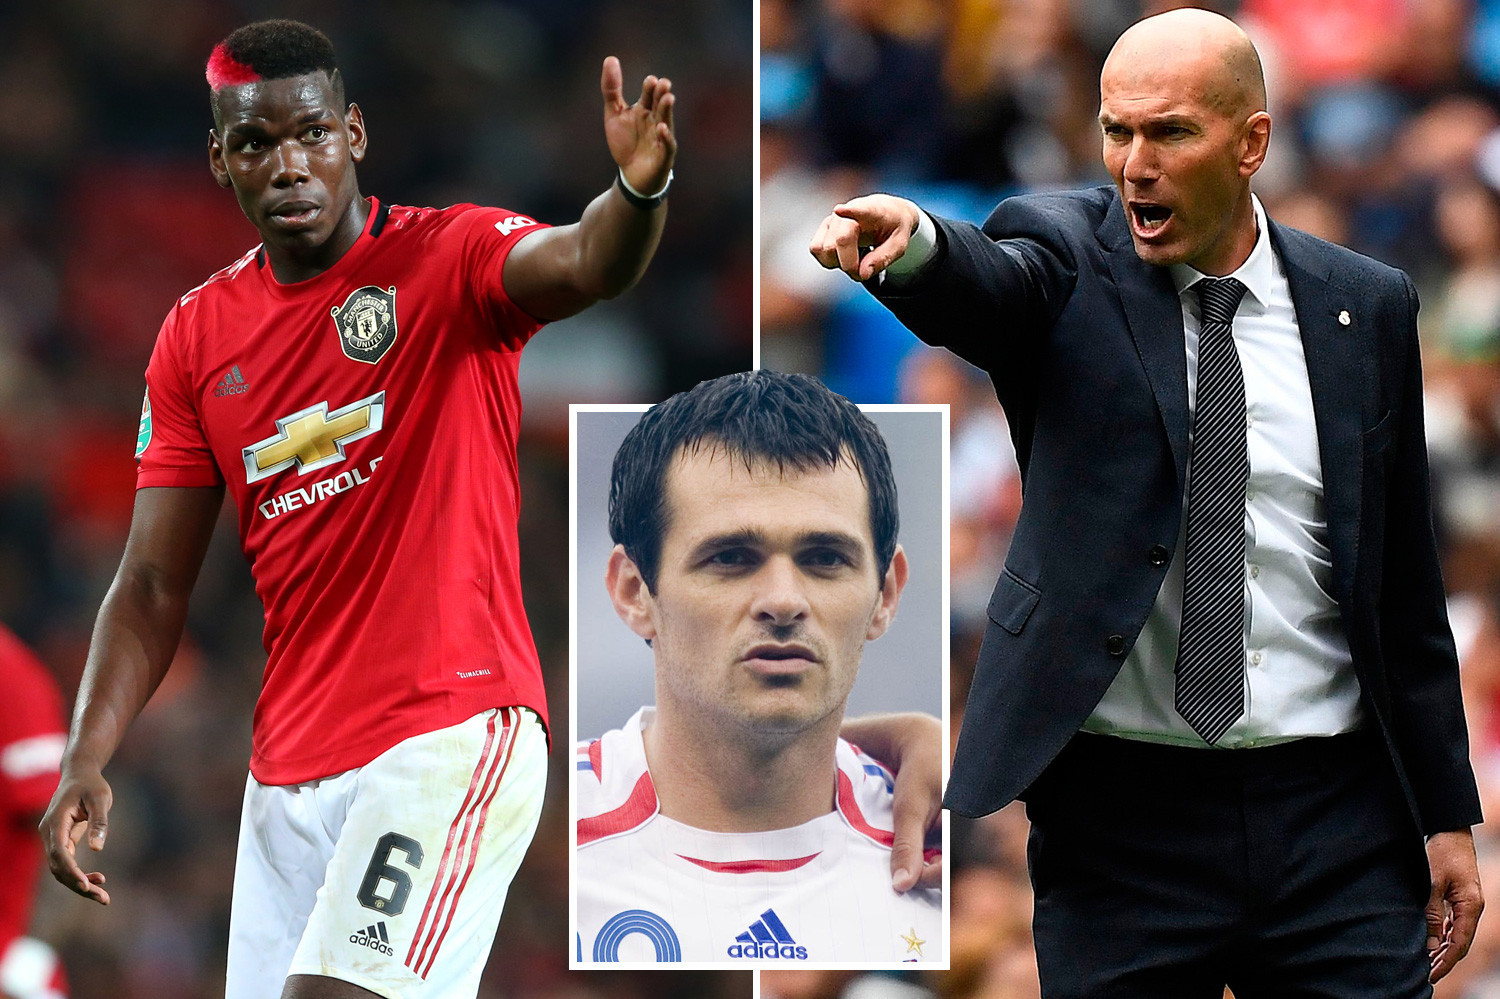 , Pogba wants to quit Man Utd for Real Madrid in transfer that makes sense for both clubs, claims ex-France star Sagnol